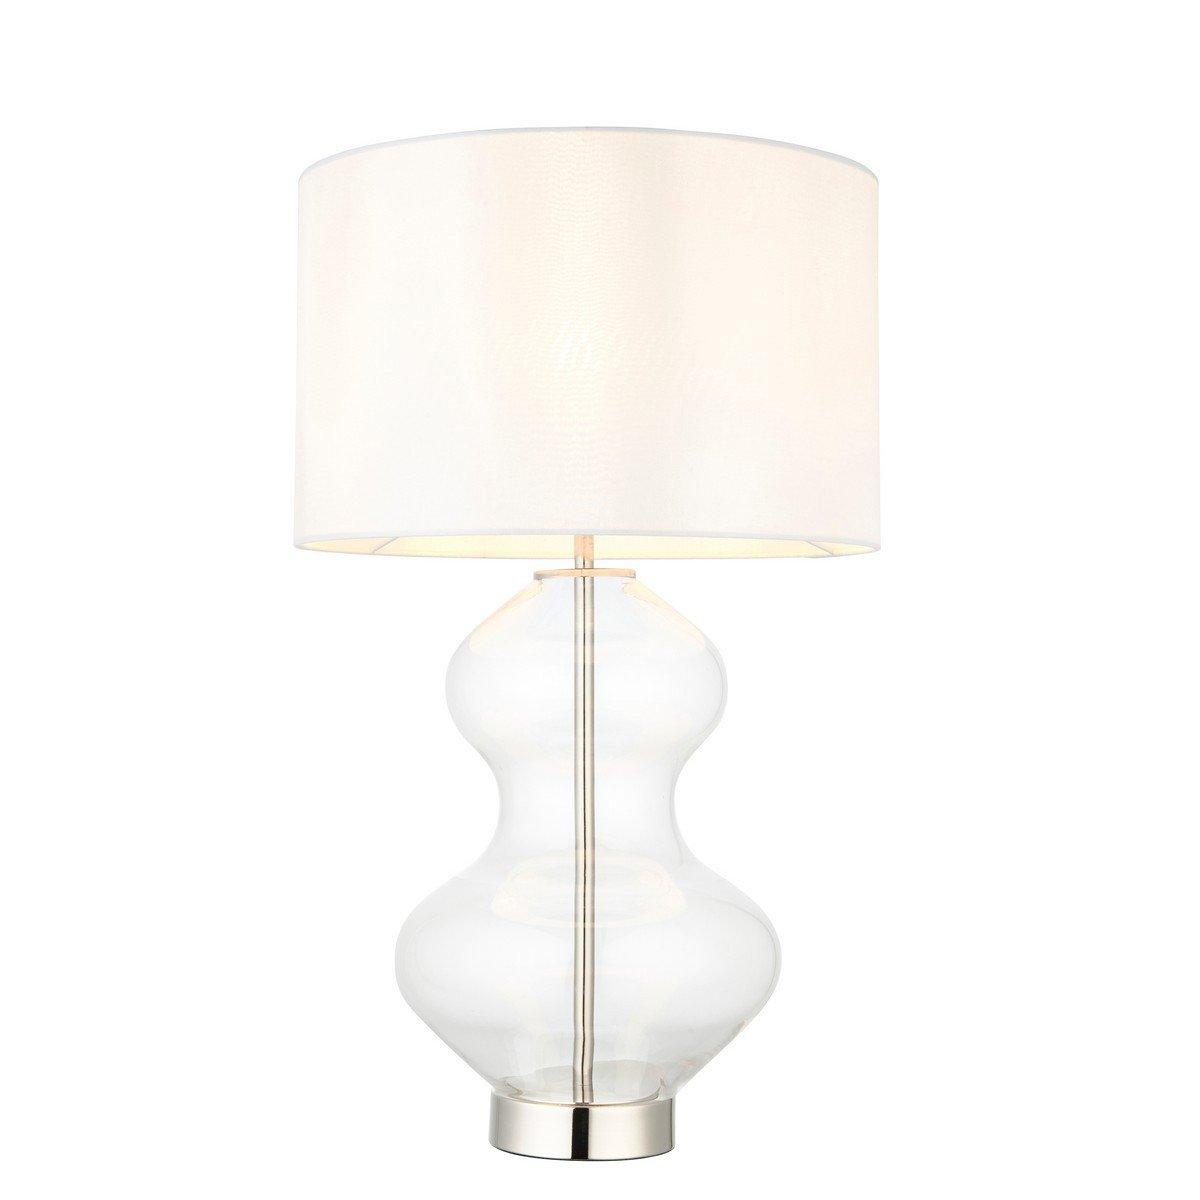 Lecce Complete Table Lamp Bright Nickel Plate Glass With Vintage White Fabric